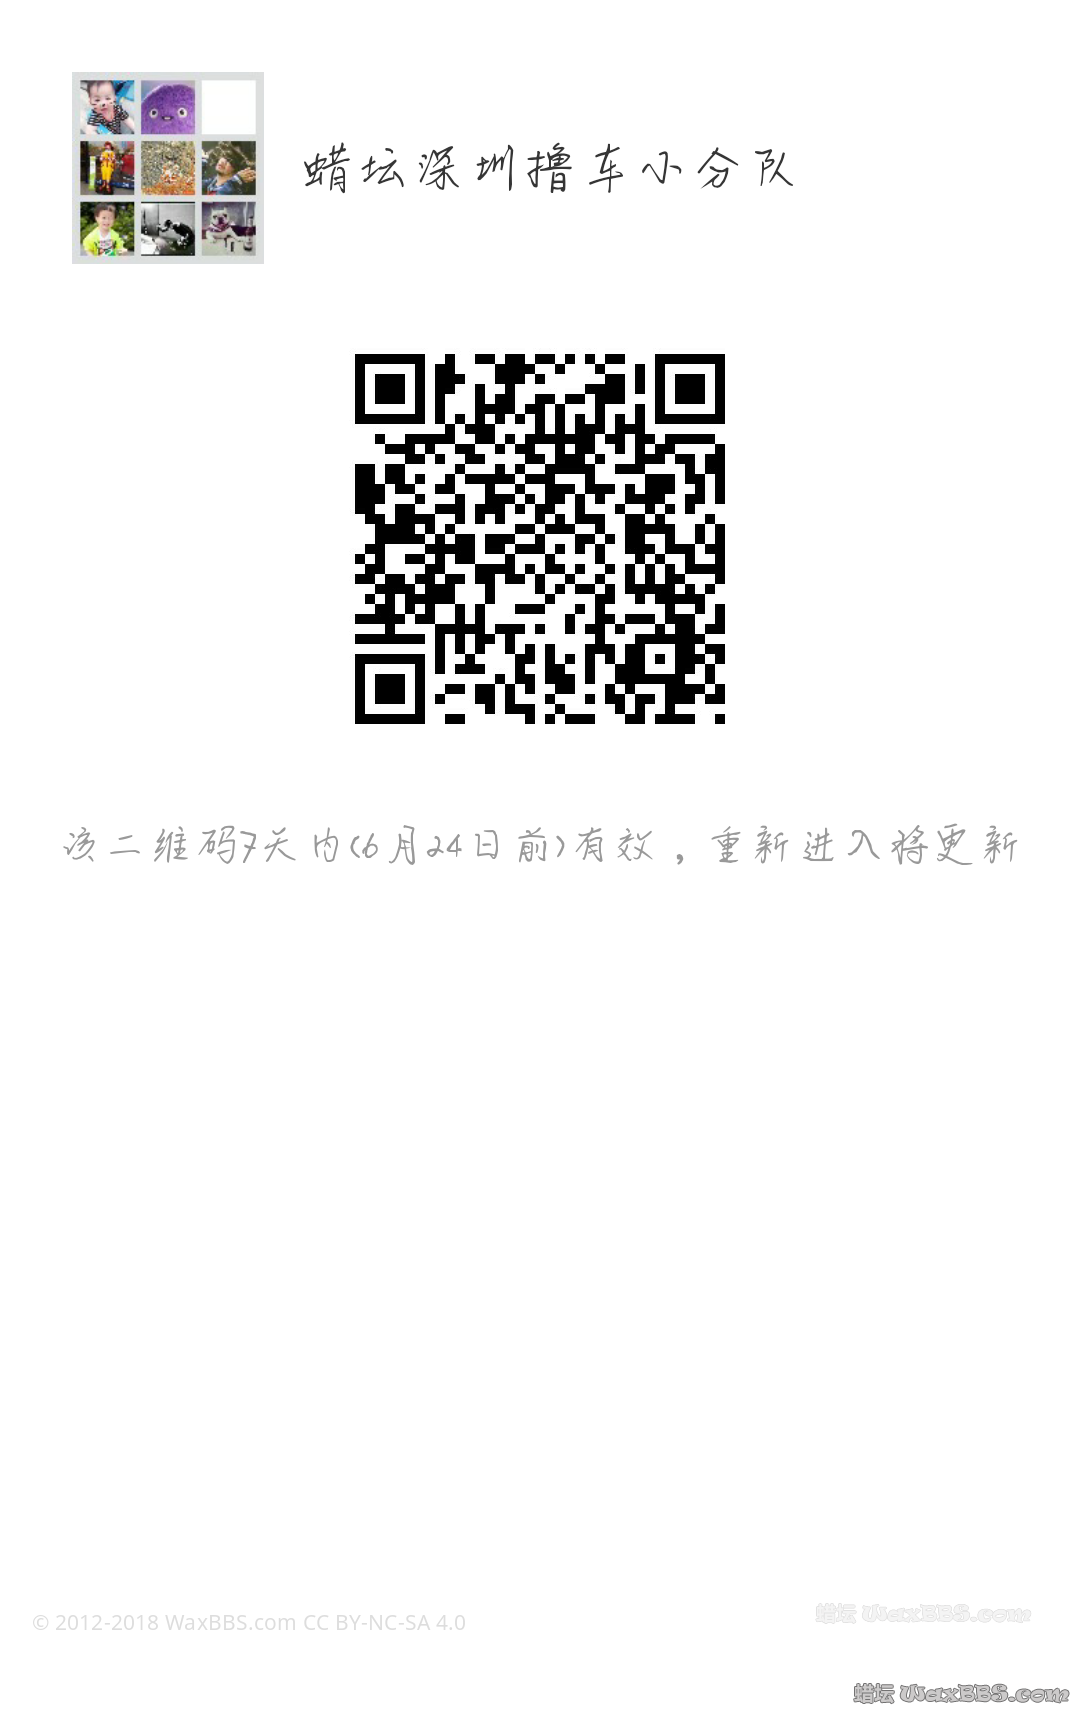 mmqrcode1497690312424.png